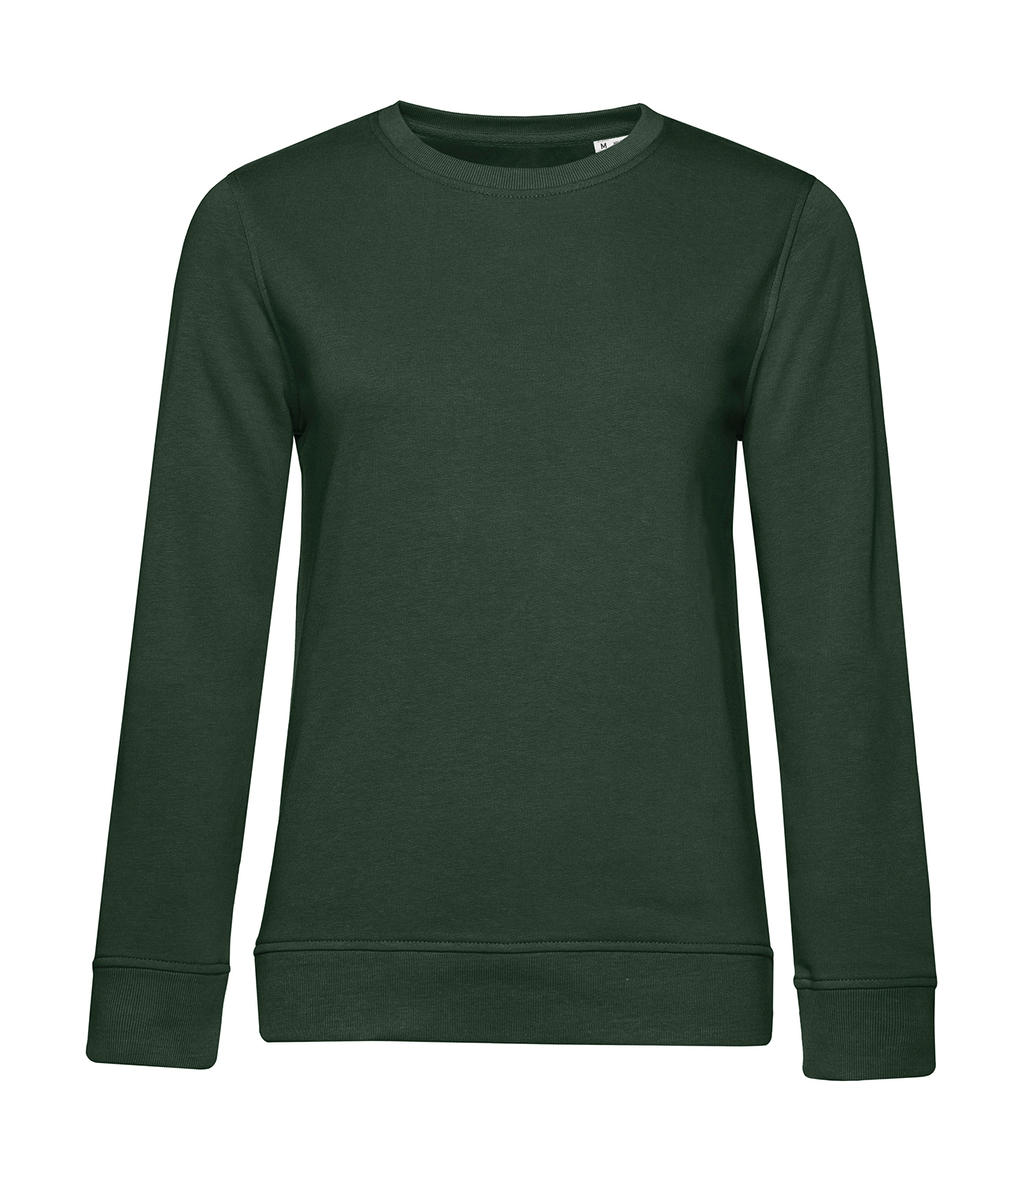  Organic Inspire Crew Neck /women_? in Farbe Forest Green